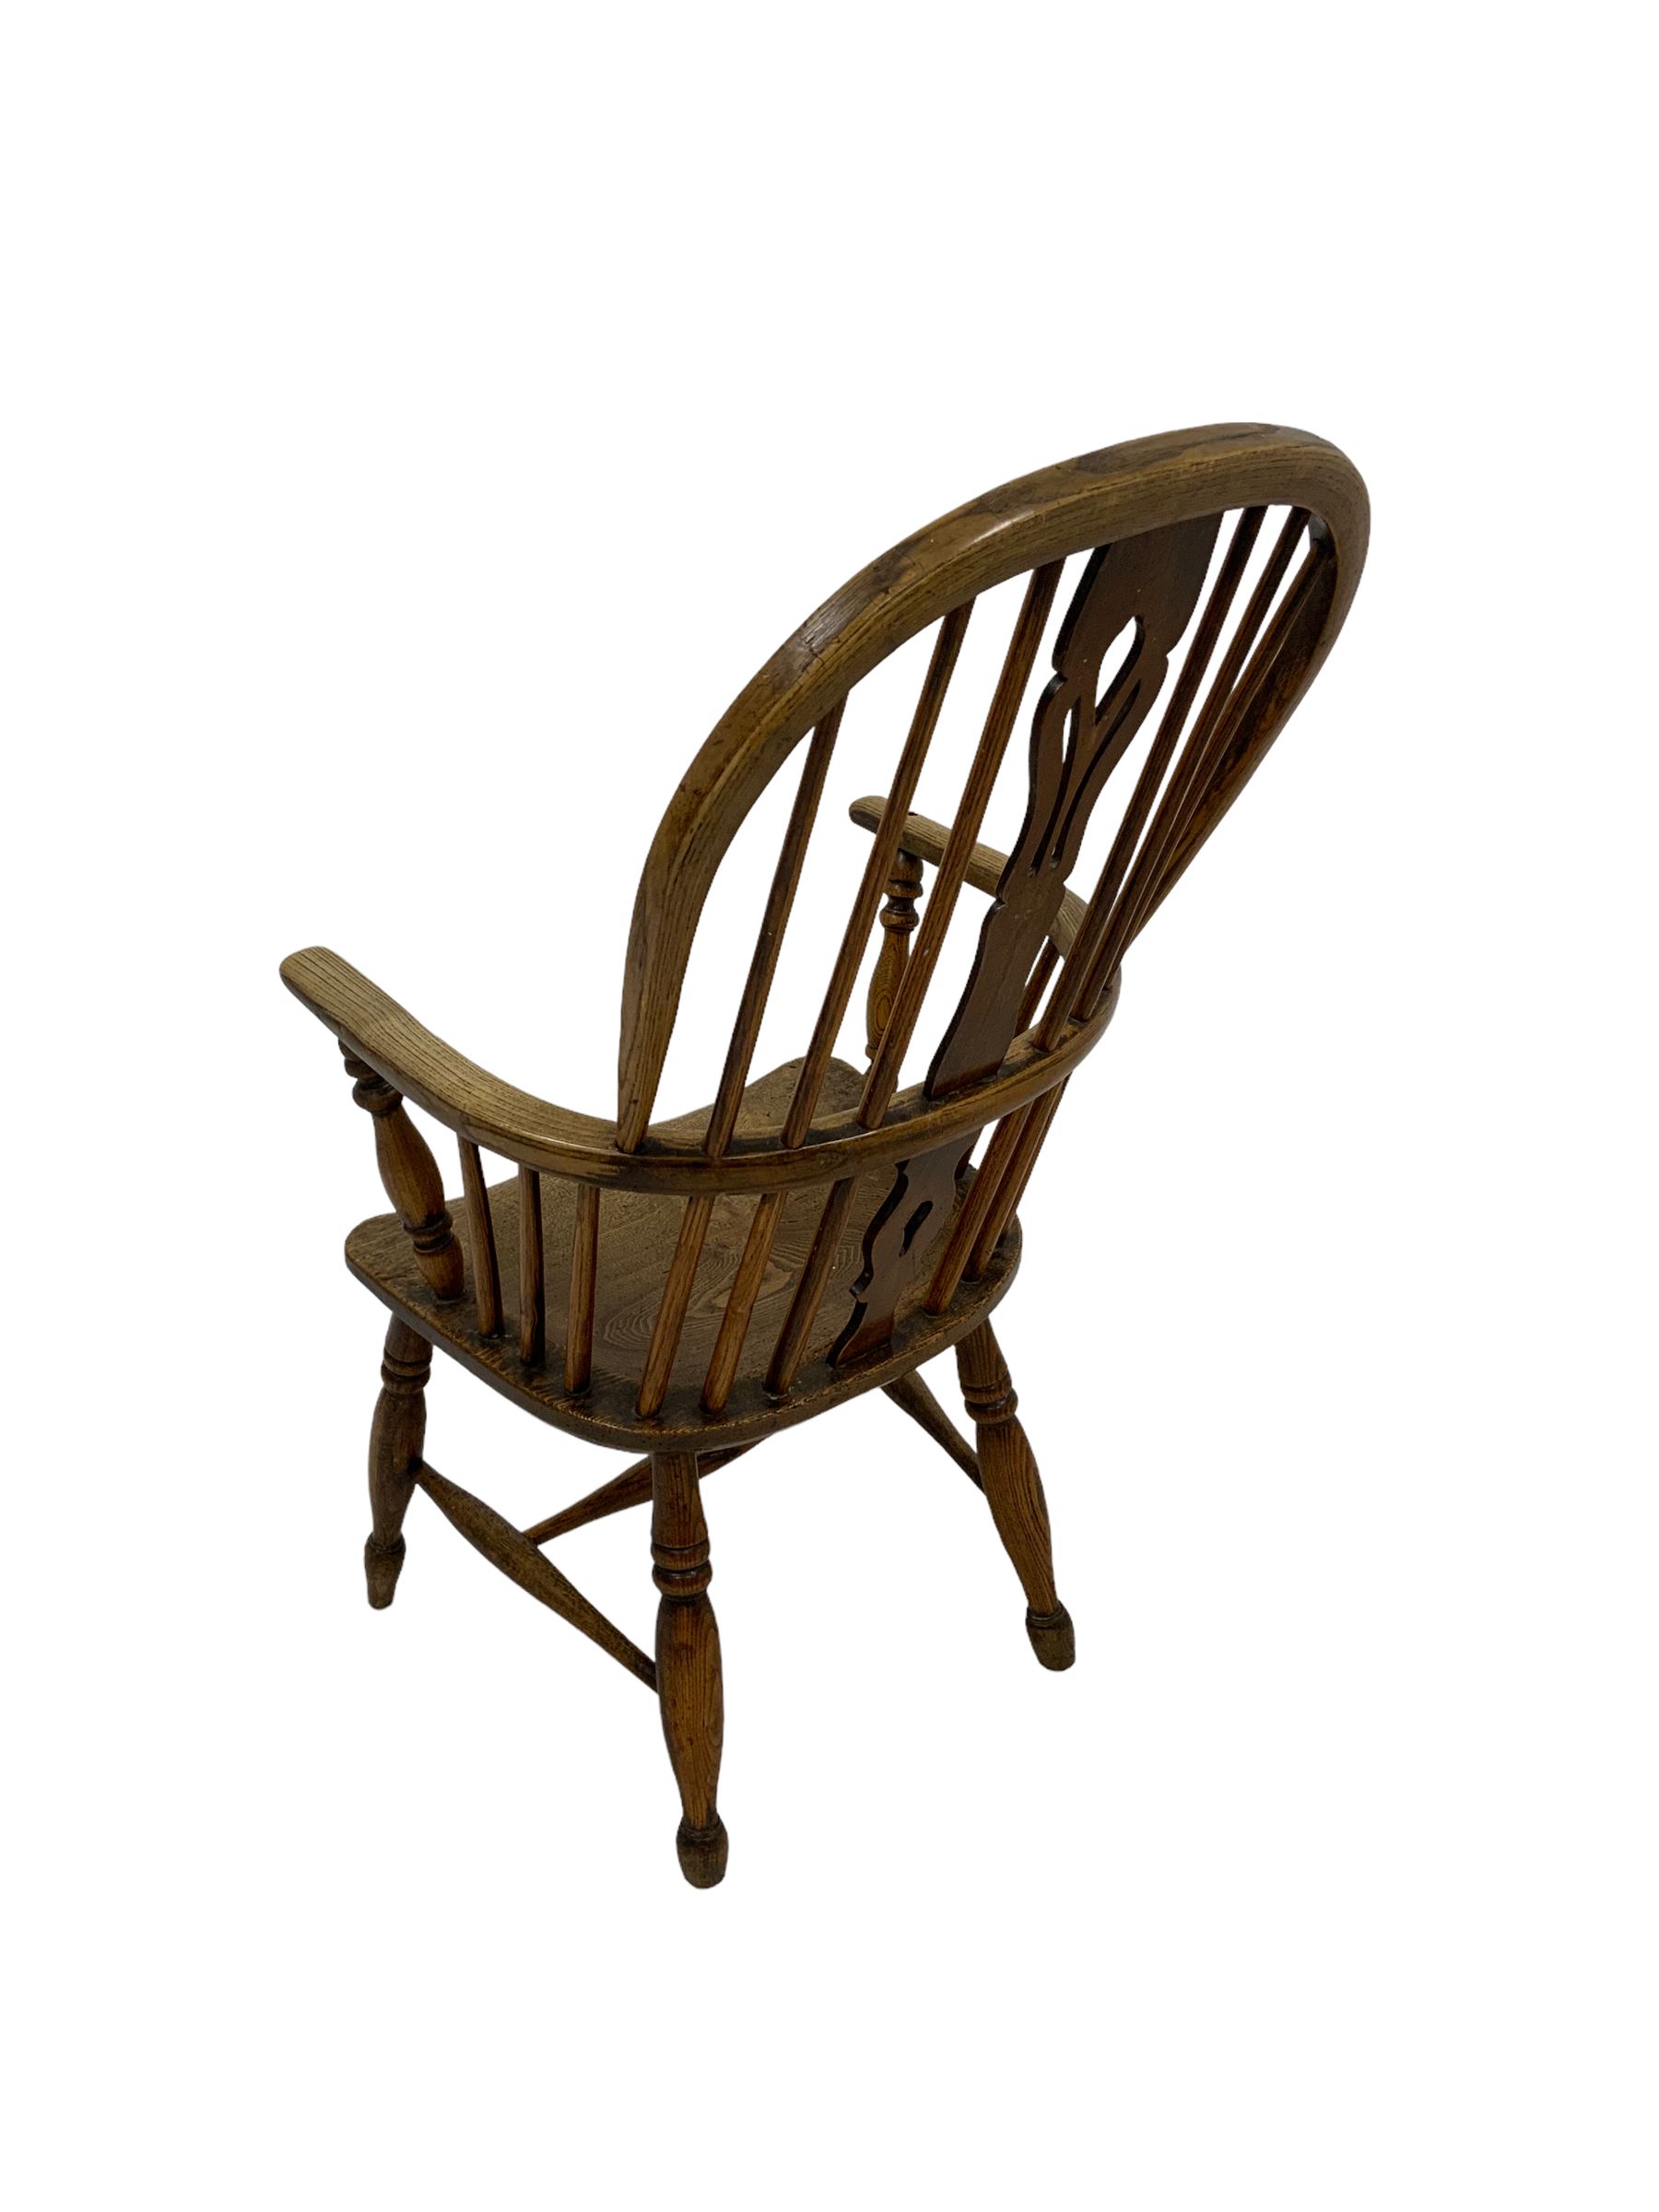 19th century elm Windsor chair - Image 4 of 4